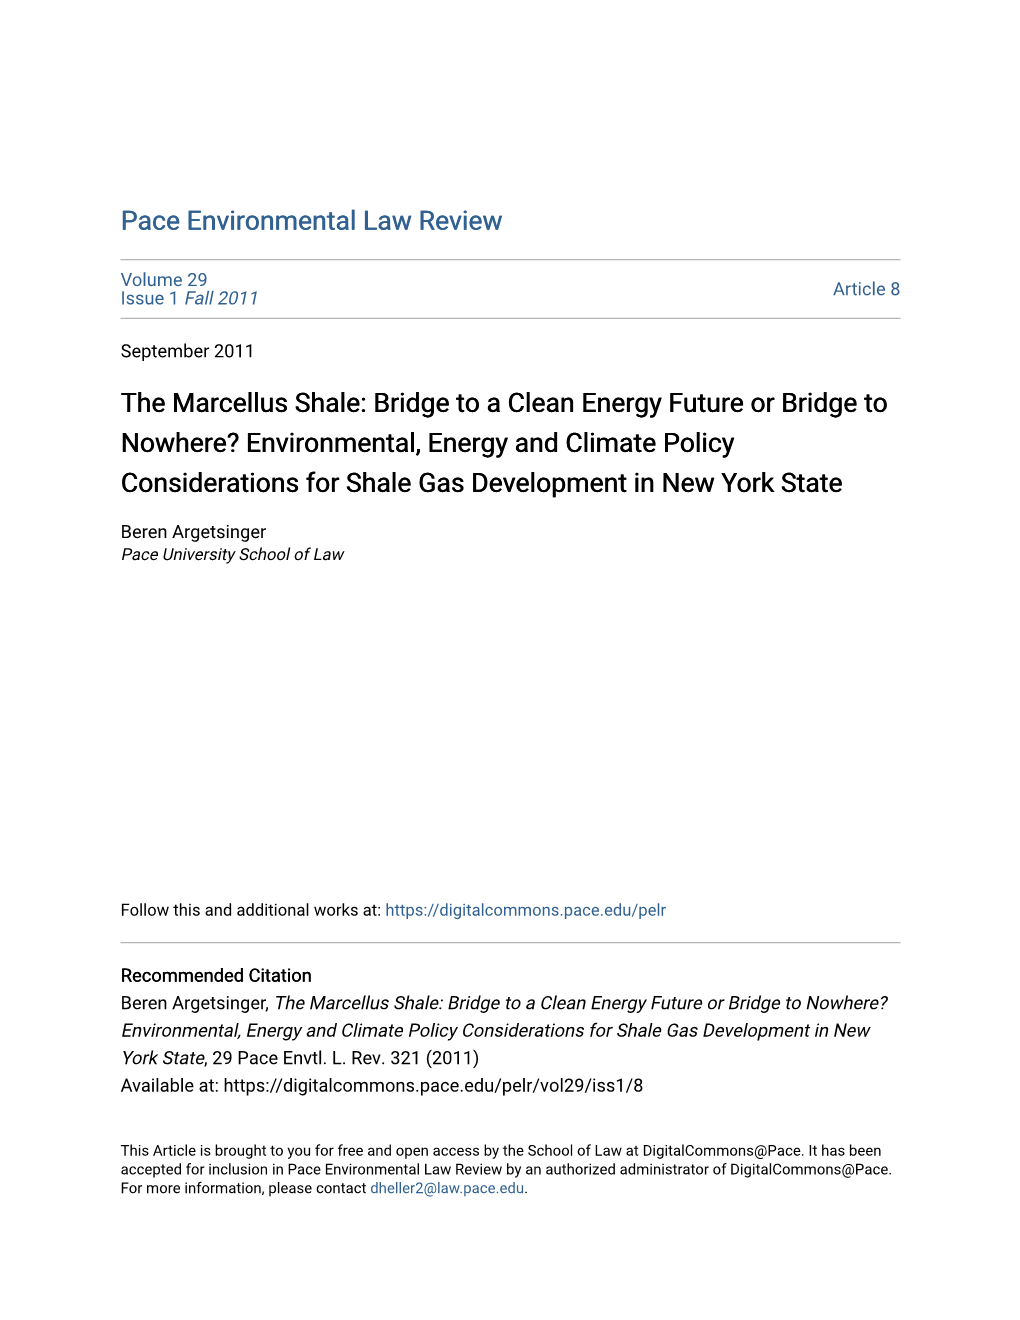 The Marcellus Shale: Bridge to a Clean Energy Future Or Bridge To